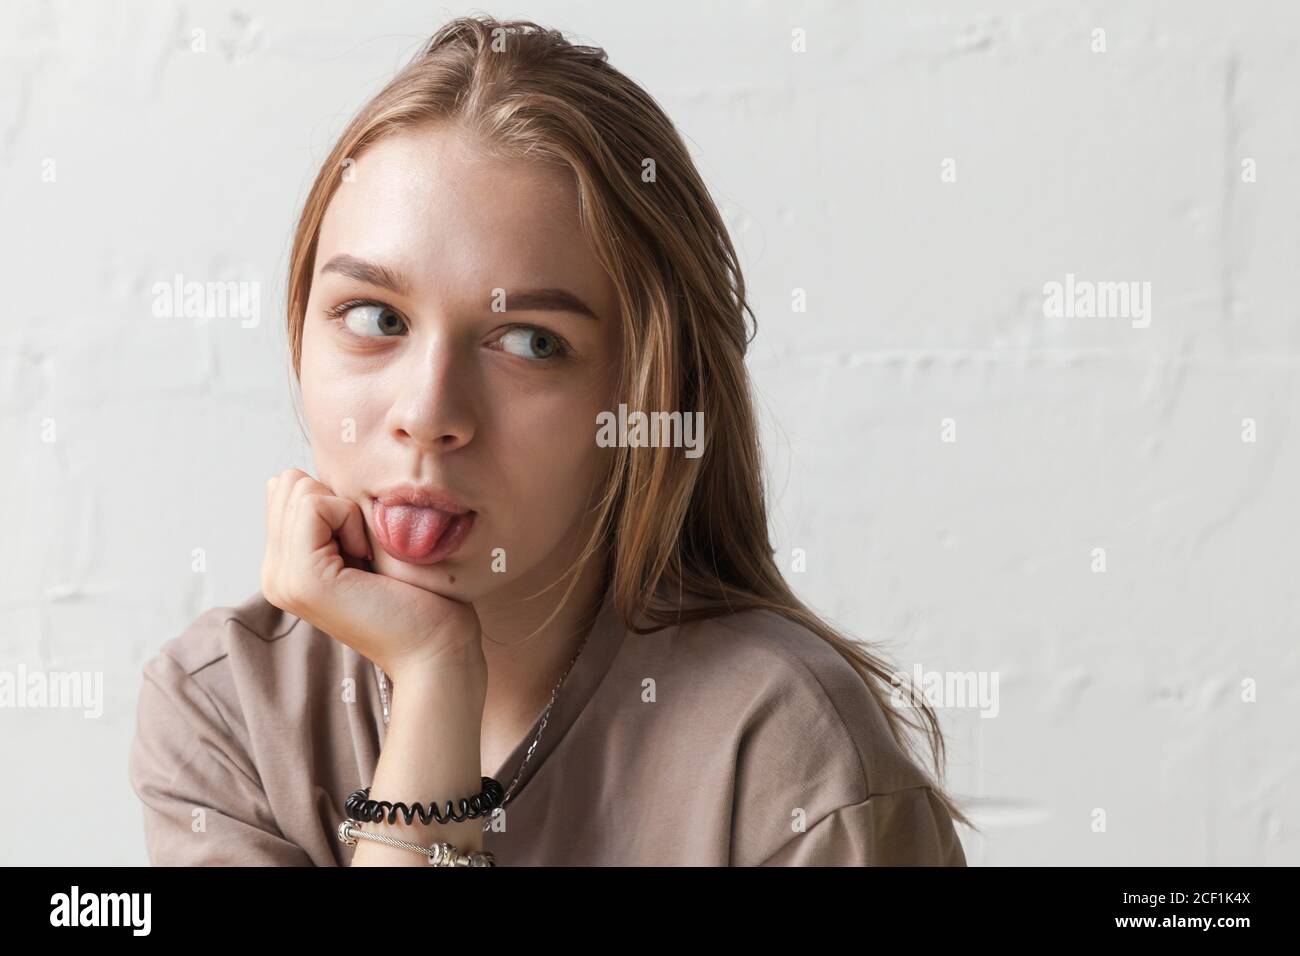 Funny blond teenage girl shows tongue, close-up studio portrait with natural light over white wall Stock Photo